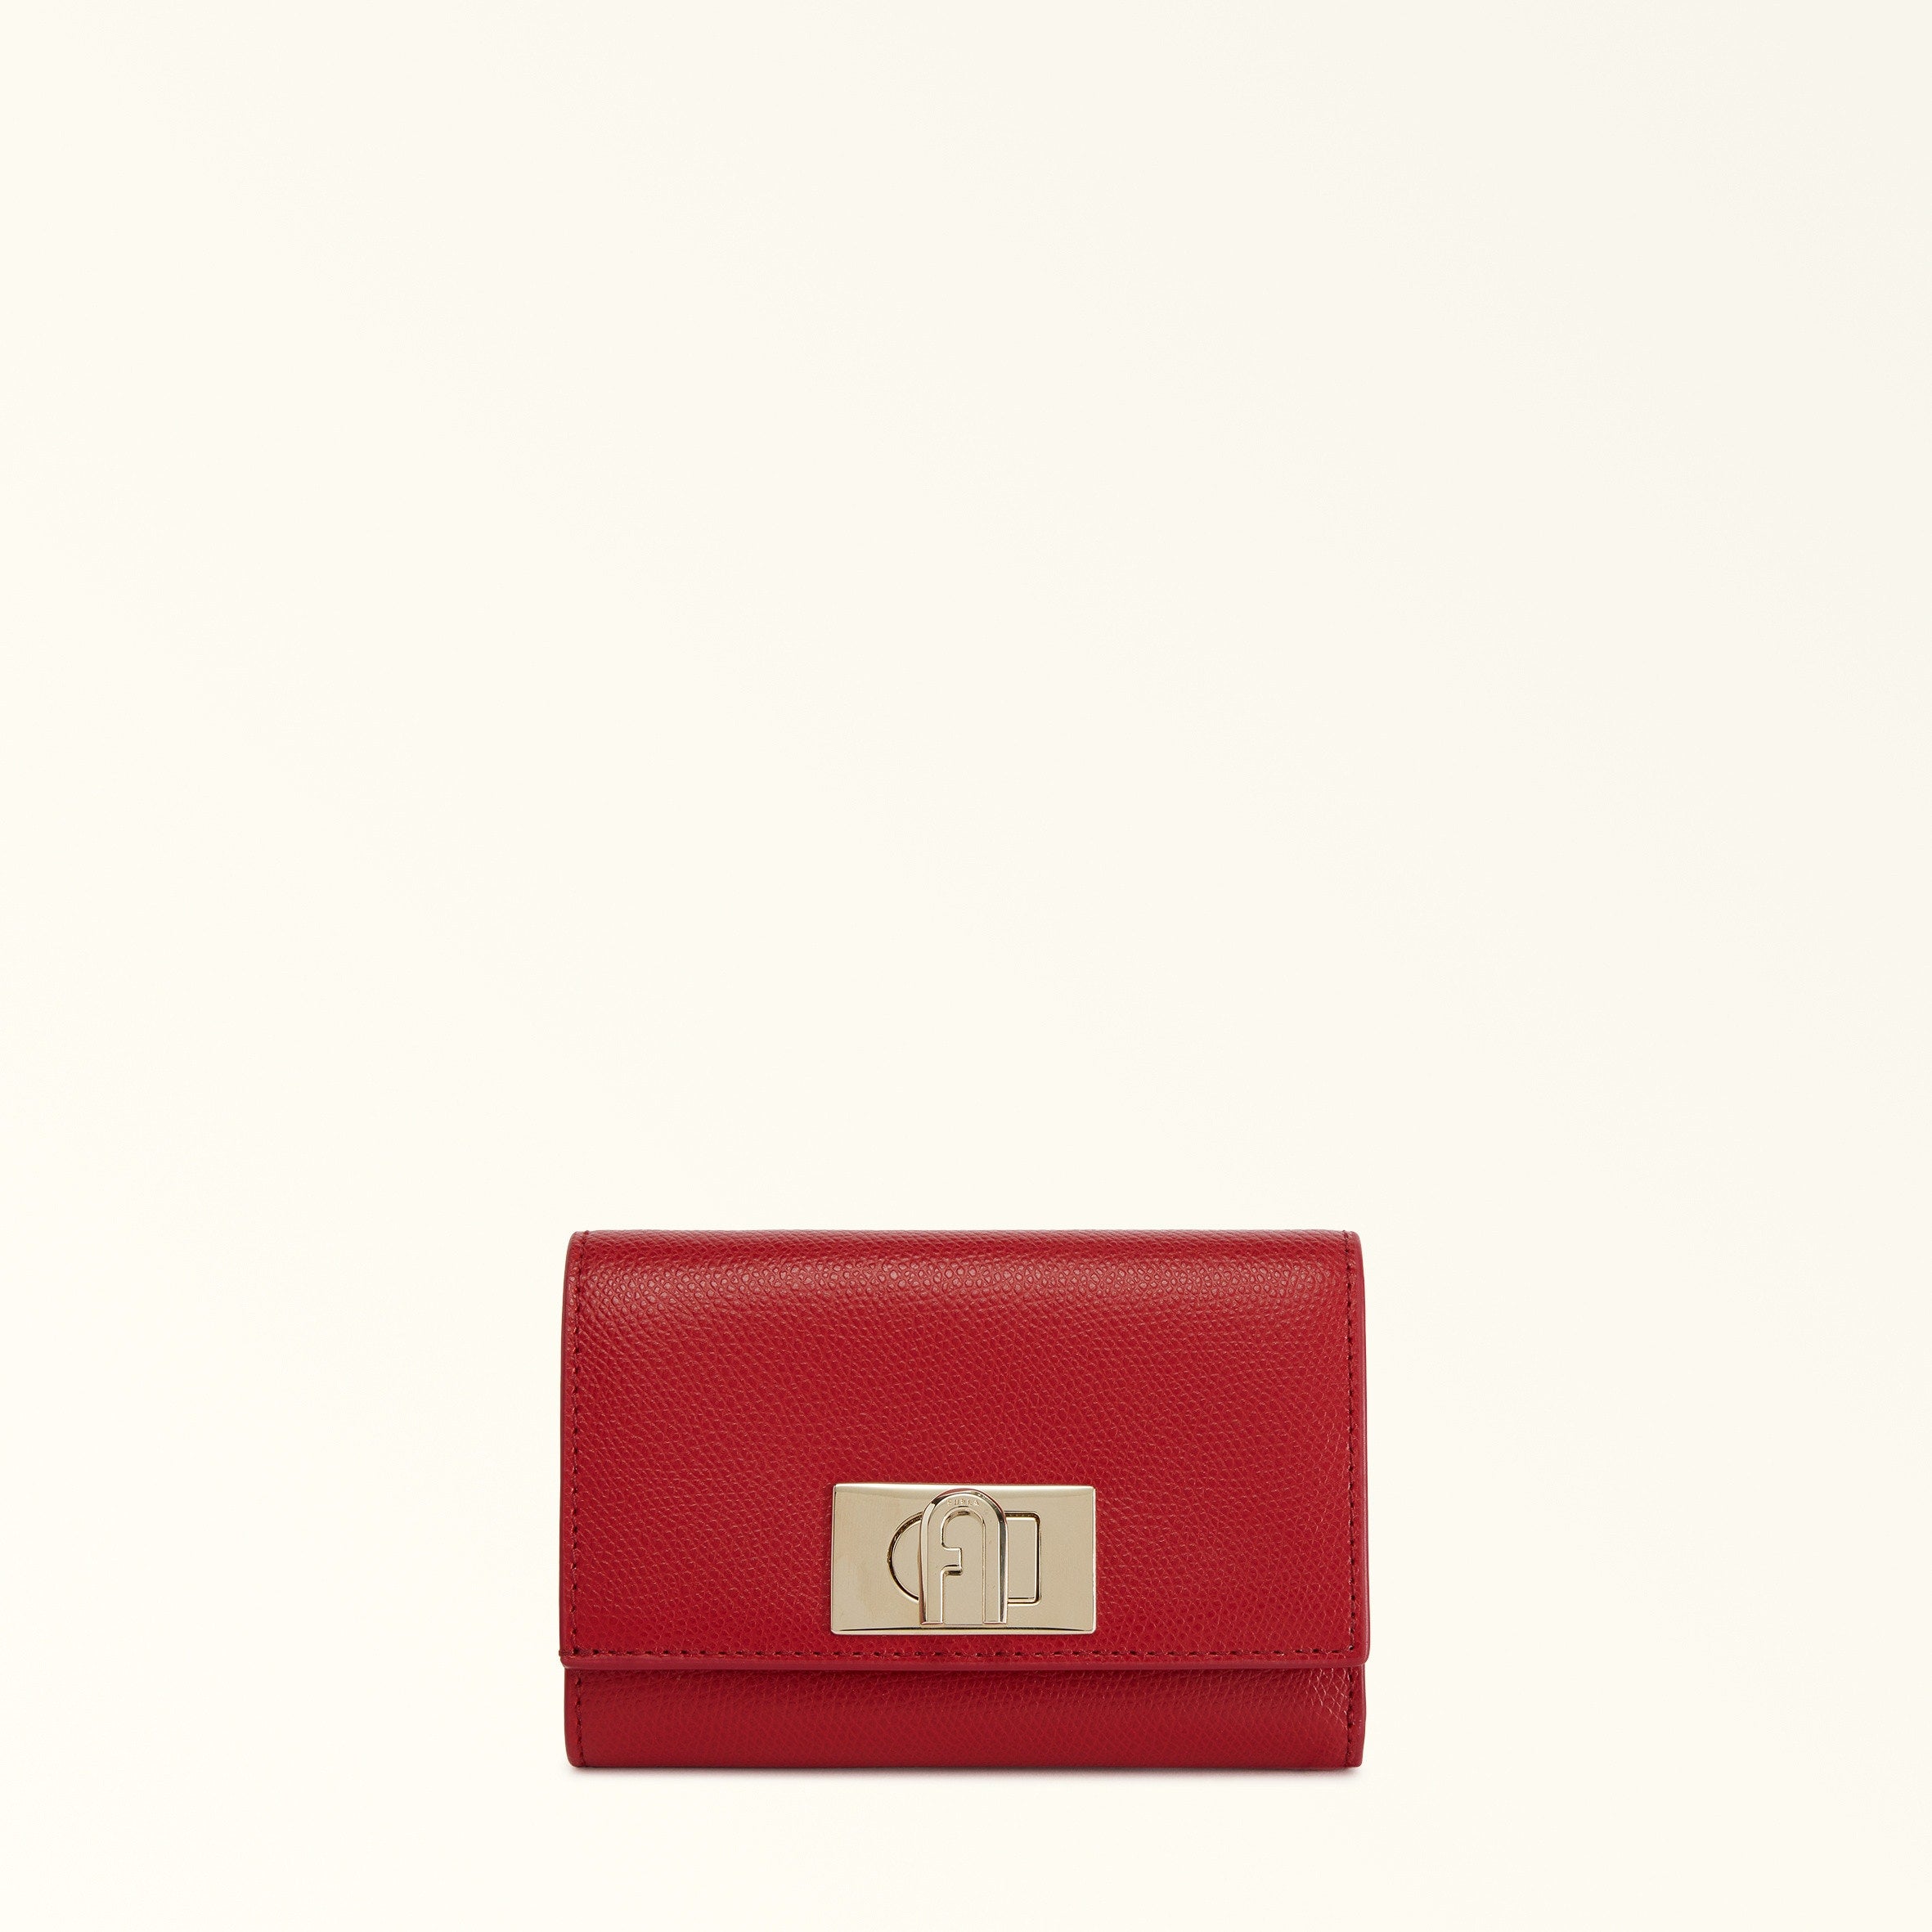 Furla 1927 Compact Wallet Rosso Vene M WP00225 WP00225ARE0002673S1007